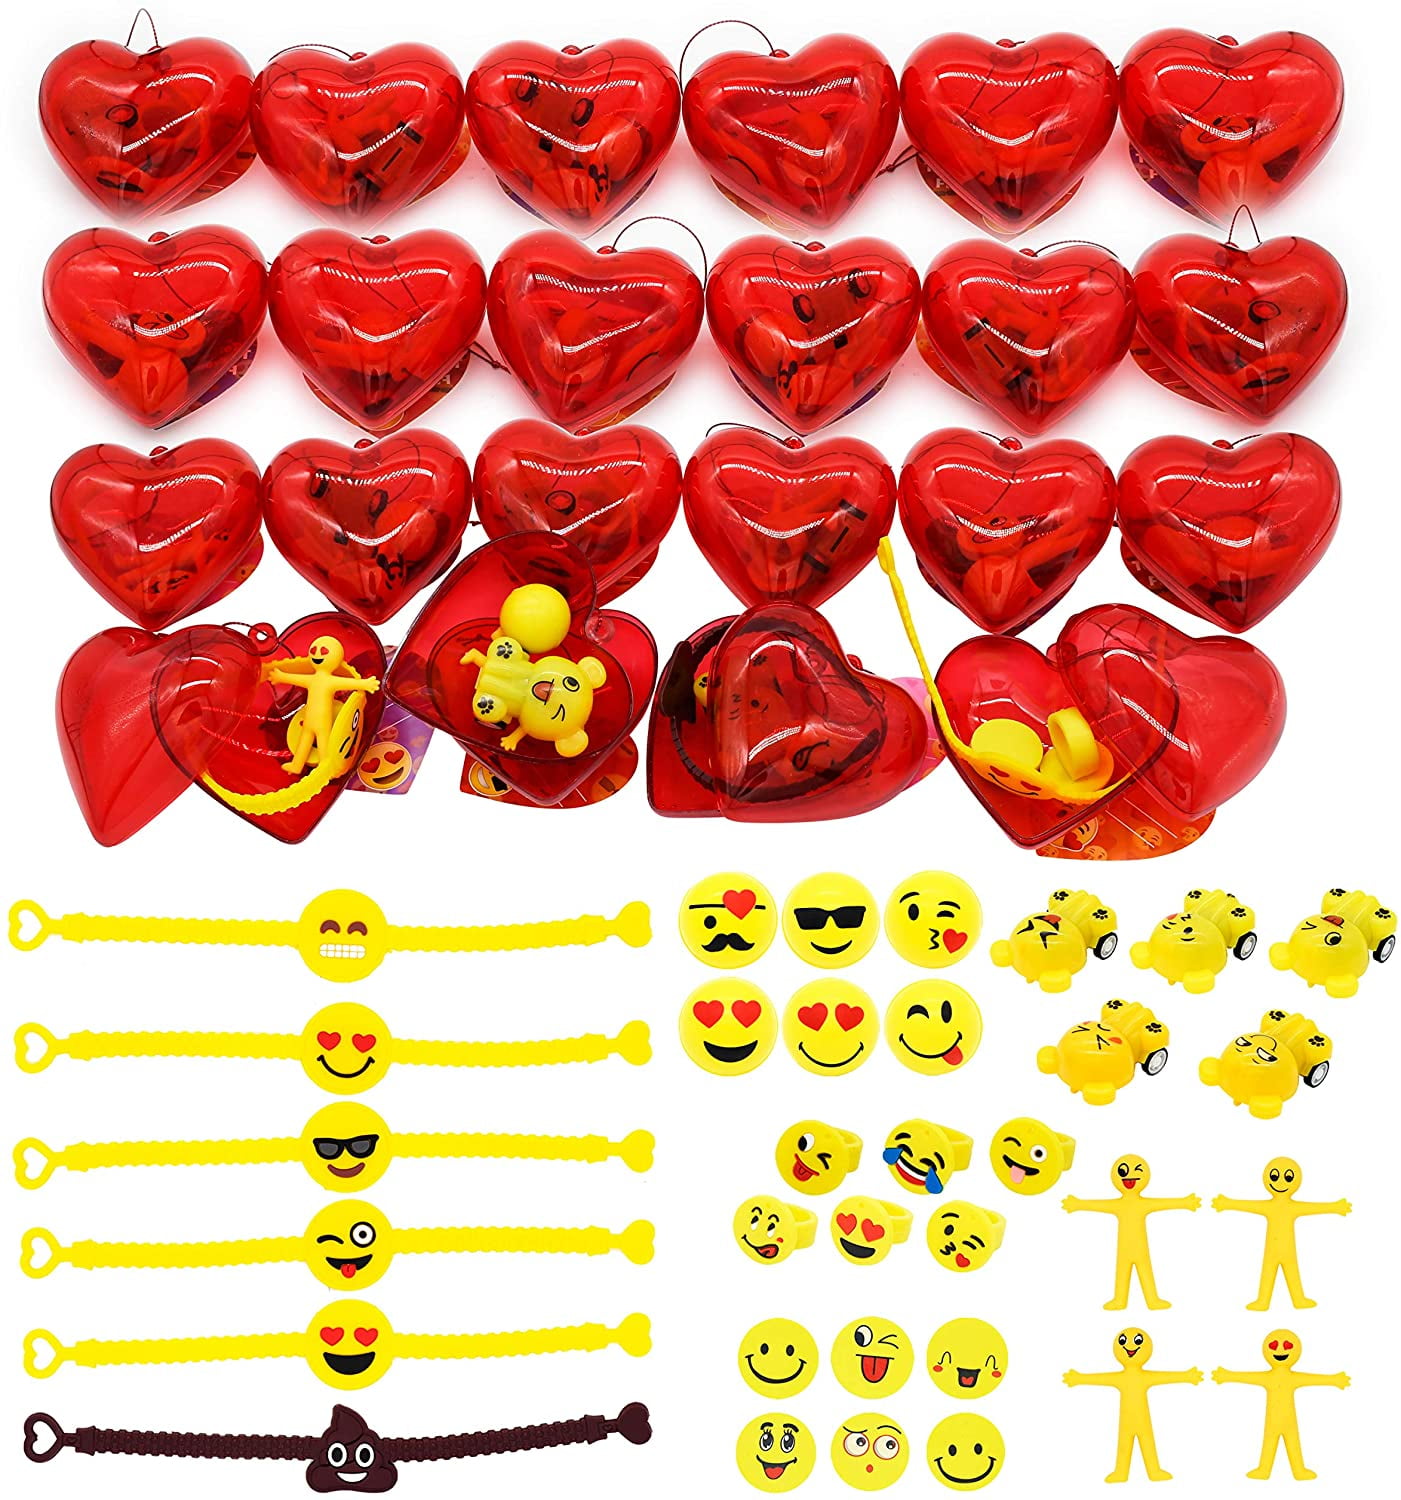 Emoji Party Favors Filled Hearts for Kids Valentine Exchange or Party Game Prizes 24 Packs Kids Valentines Party Favors Set Emoji Theme includes 24 Filled Heart Cases with 3 Random Emoji Toys and Valentine’s Day Cards for Classroom Exchange 